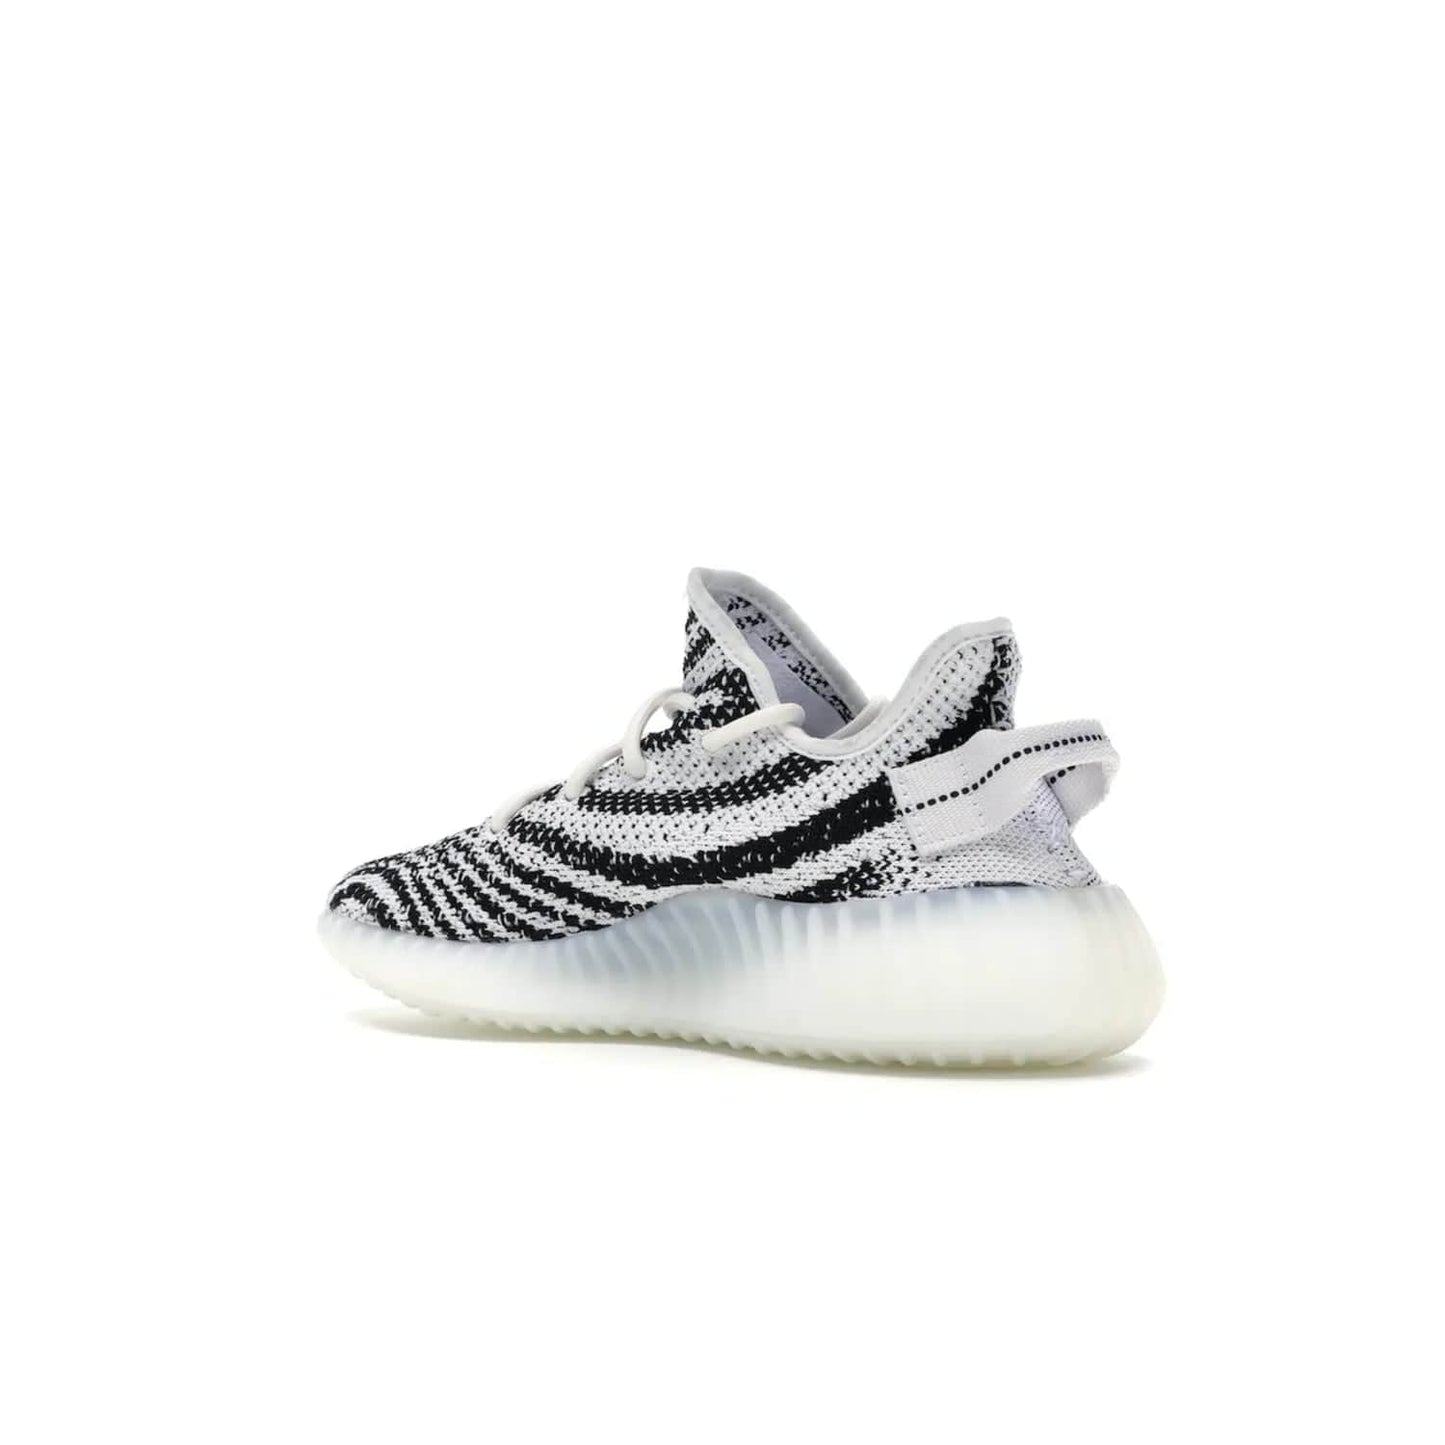 adidas Yeezy Boost 350 V2 Zebra - Image 23 - Only at www.BallersClubKickz.com - #
Score the iconic adidas Yeezy Boost 350 V2 Zebra for a fashionable addition to your street-style. Featuring a Primeknit upper and Boost sole, you'll look great and feel comfortable with every step.